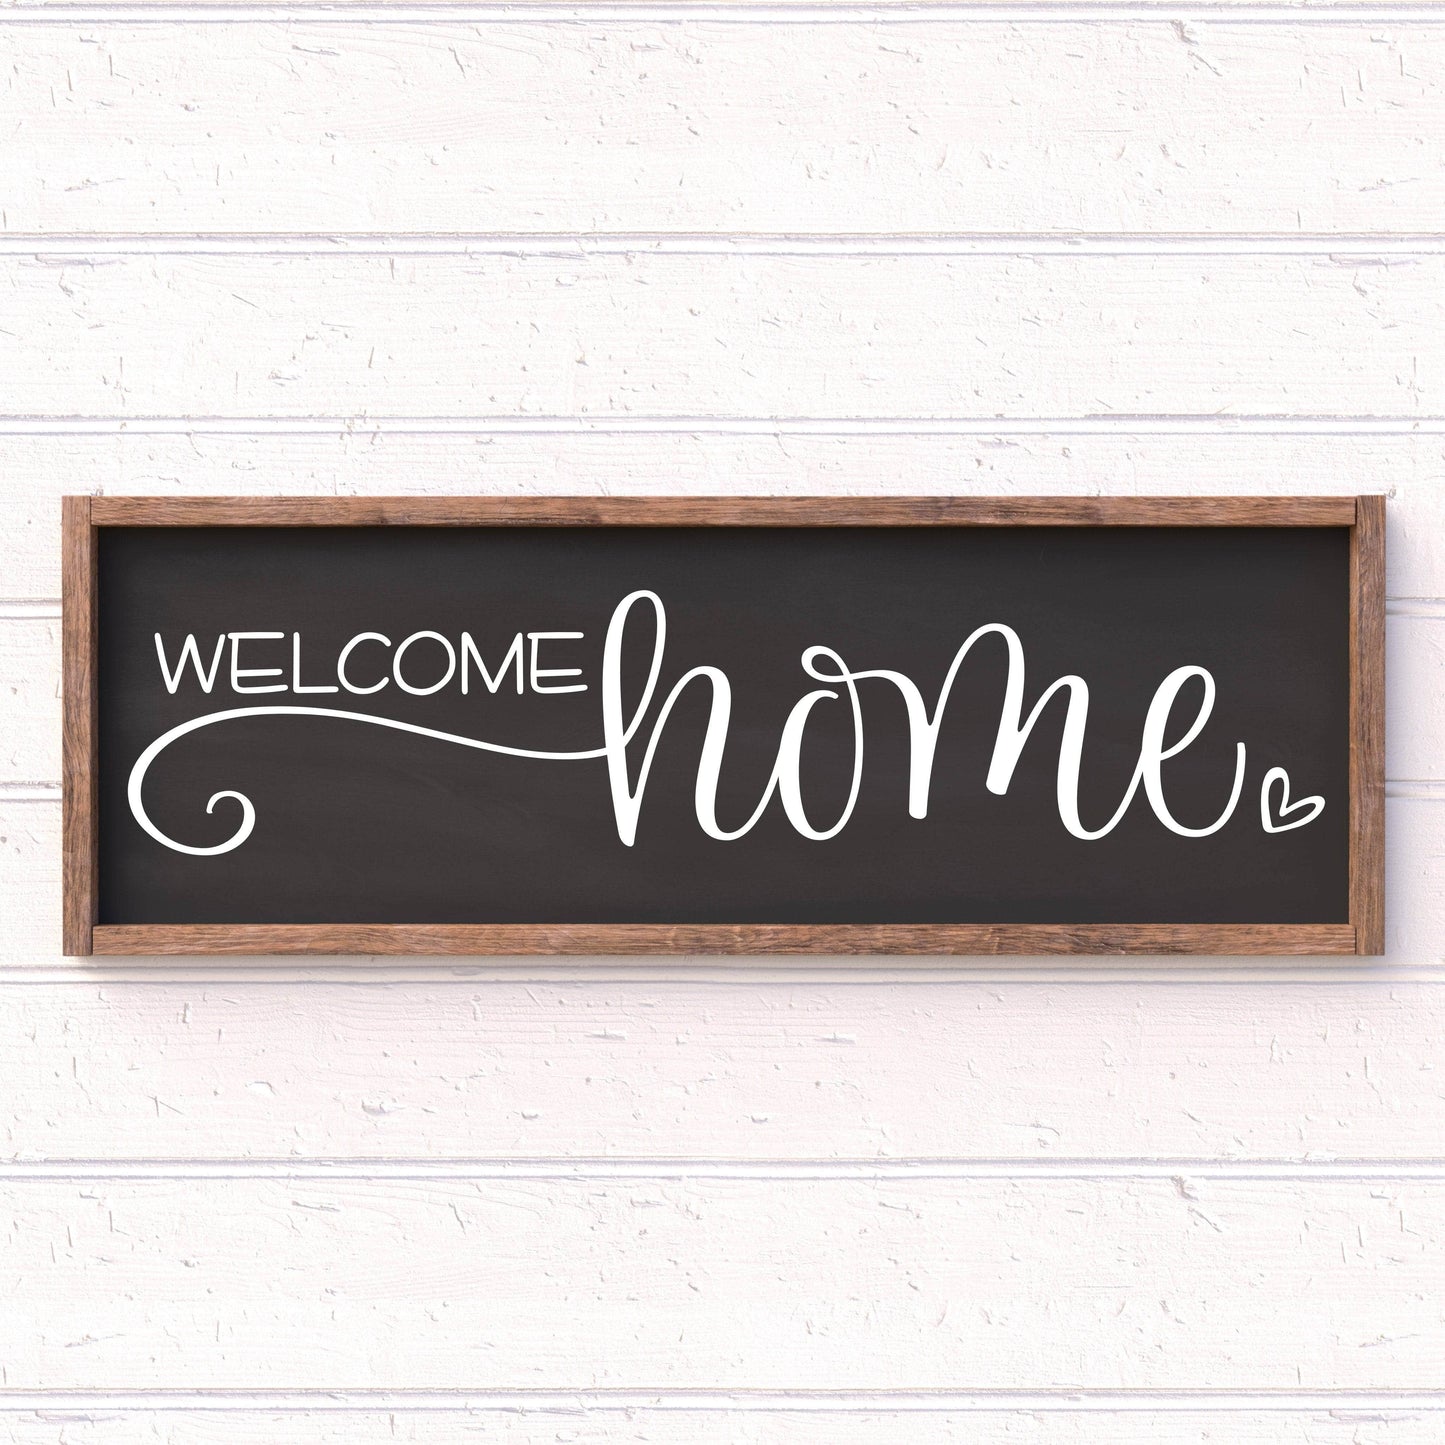 Welcome Home wood sign, farmhouse sign, rustic decor, home decor